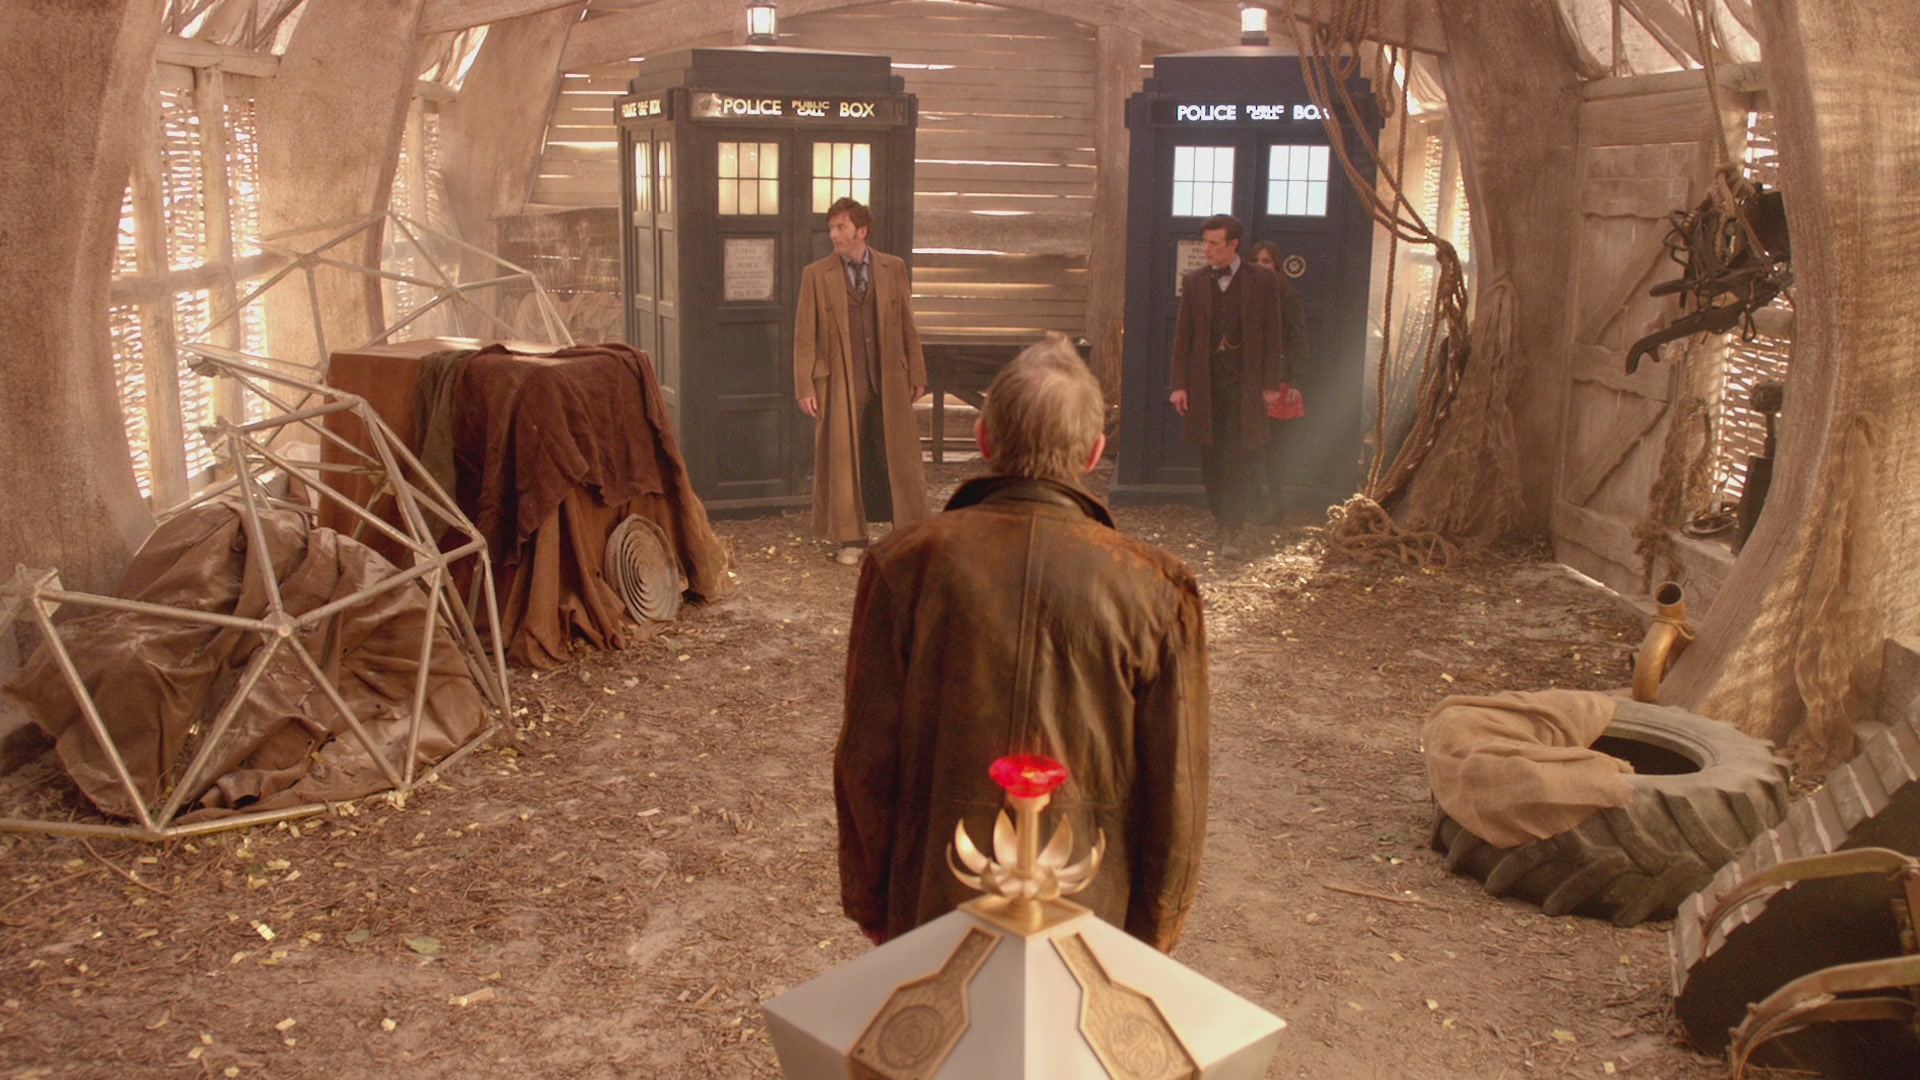 DayOfTheDoctor-Caps-1063.jpg